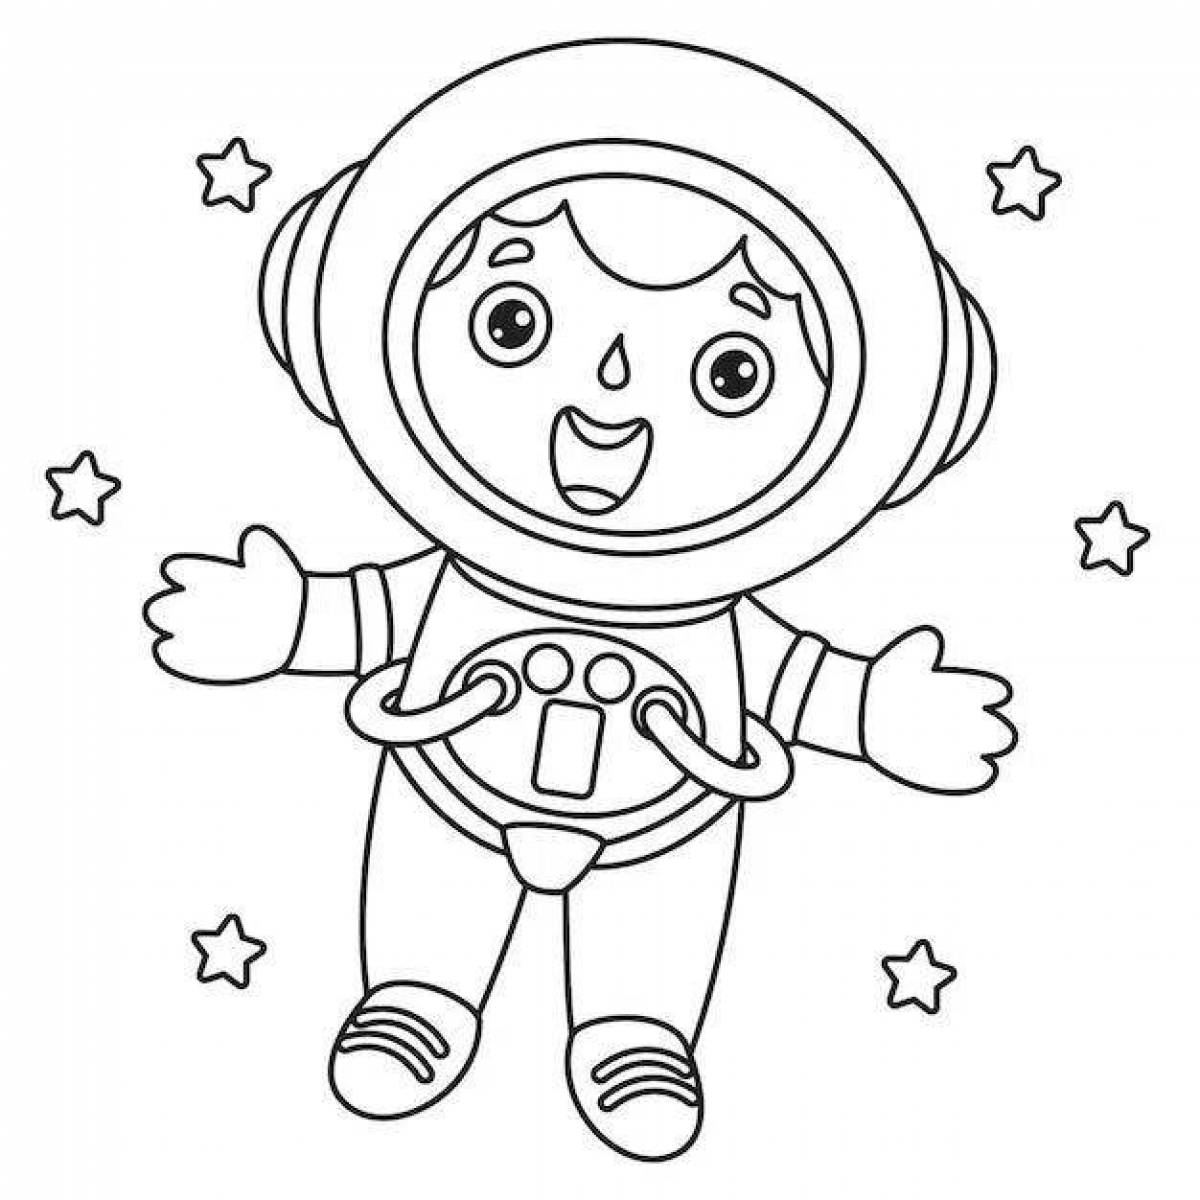 Fun astronaut coloring for kids